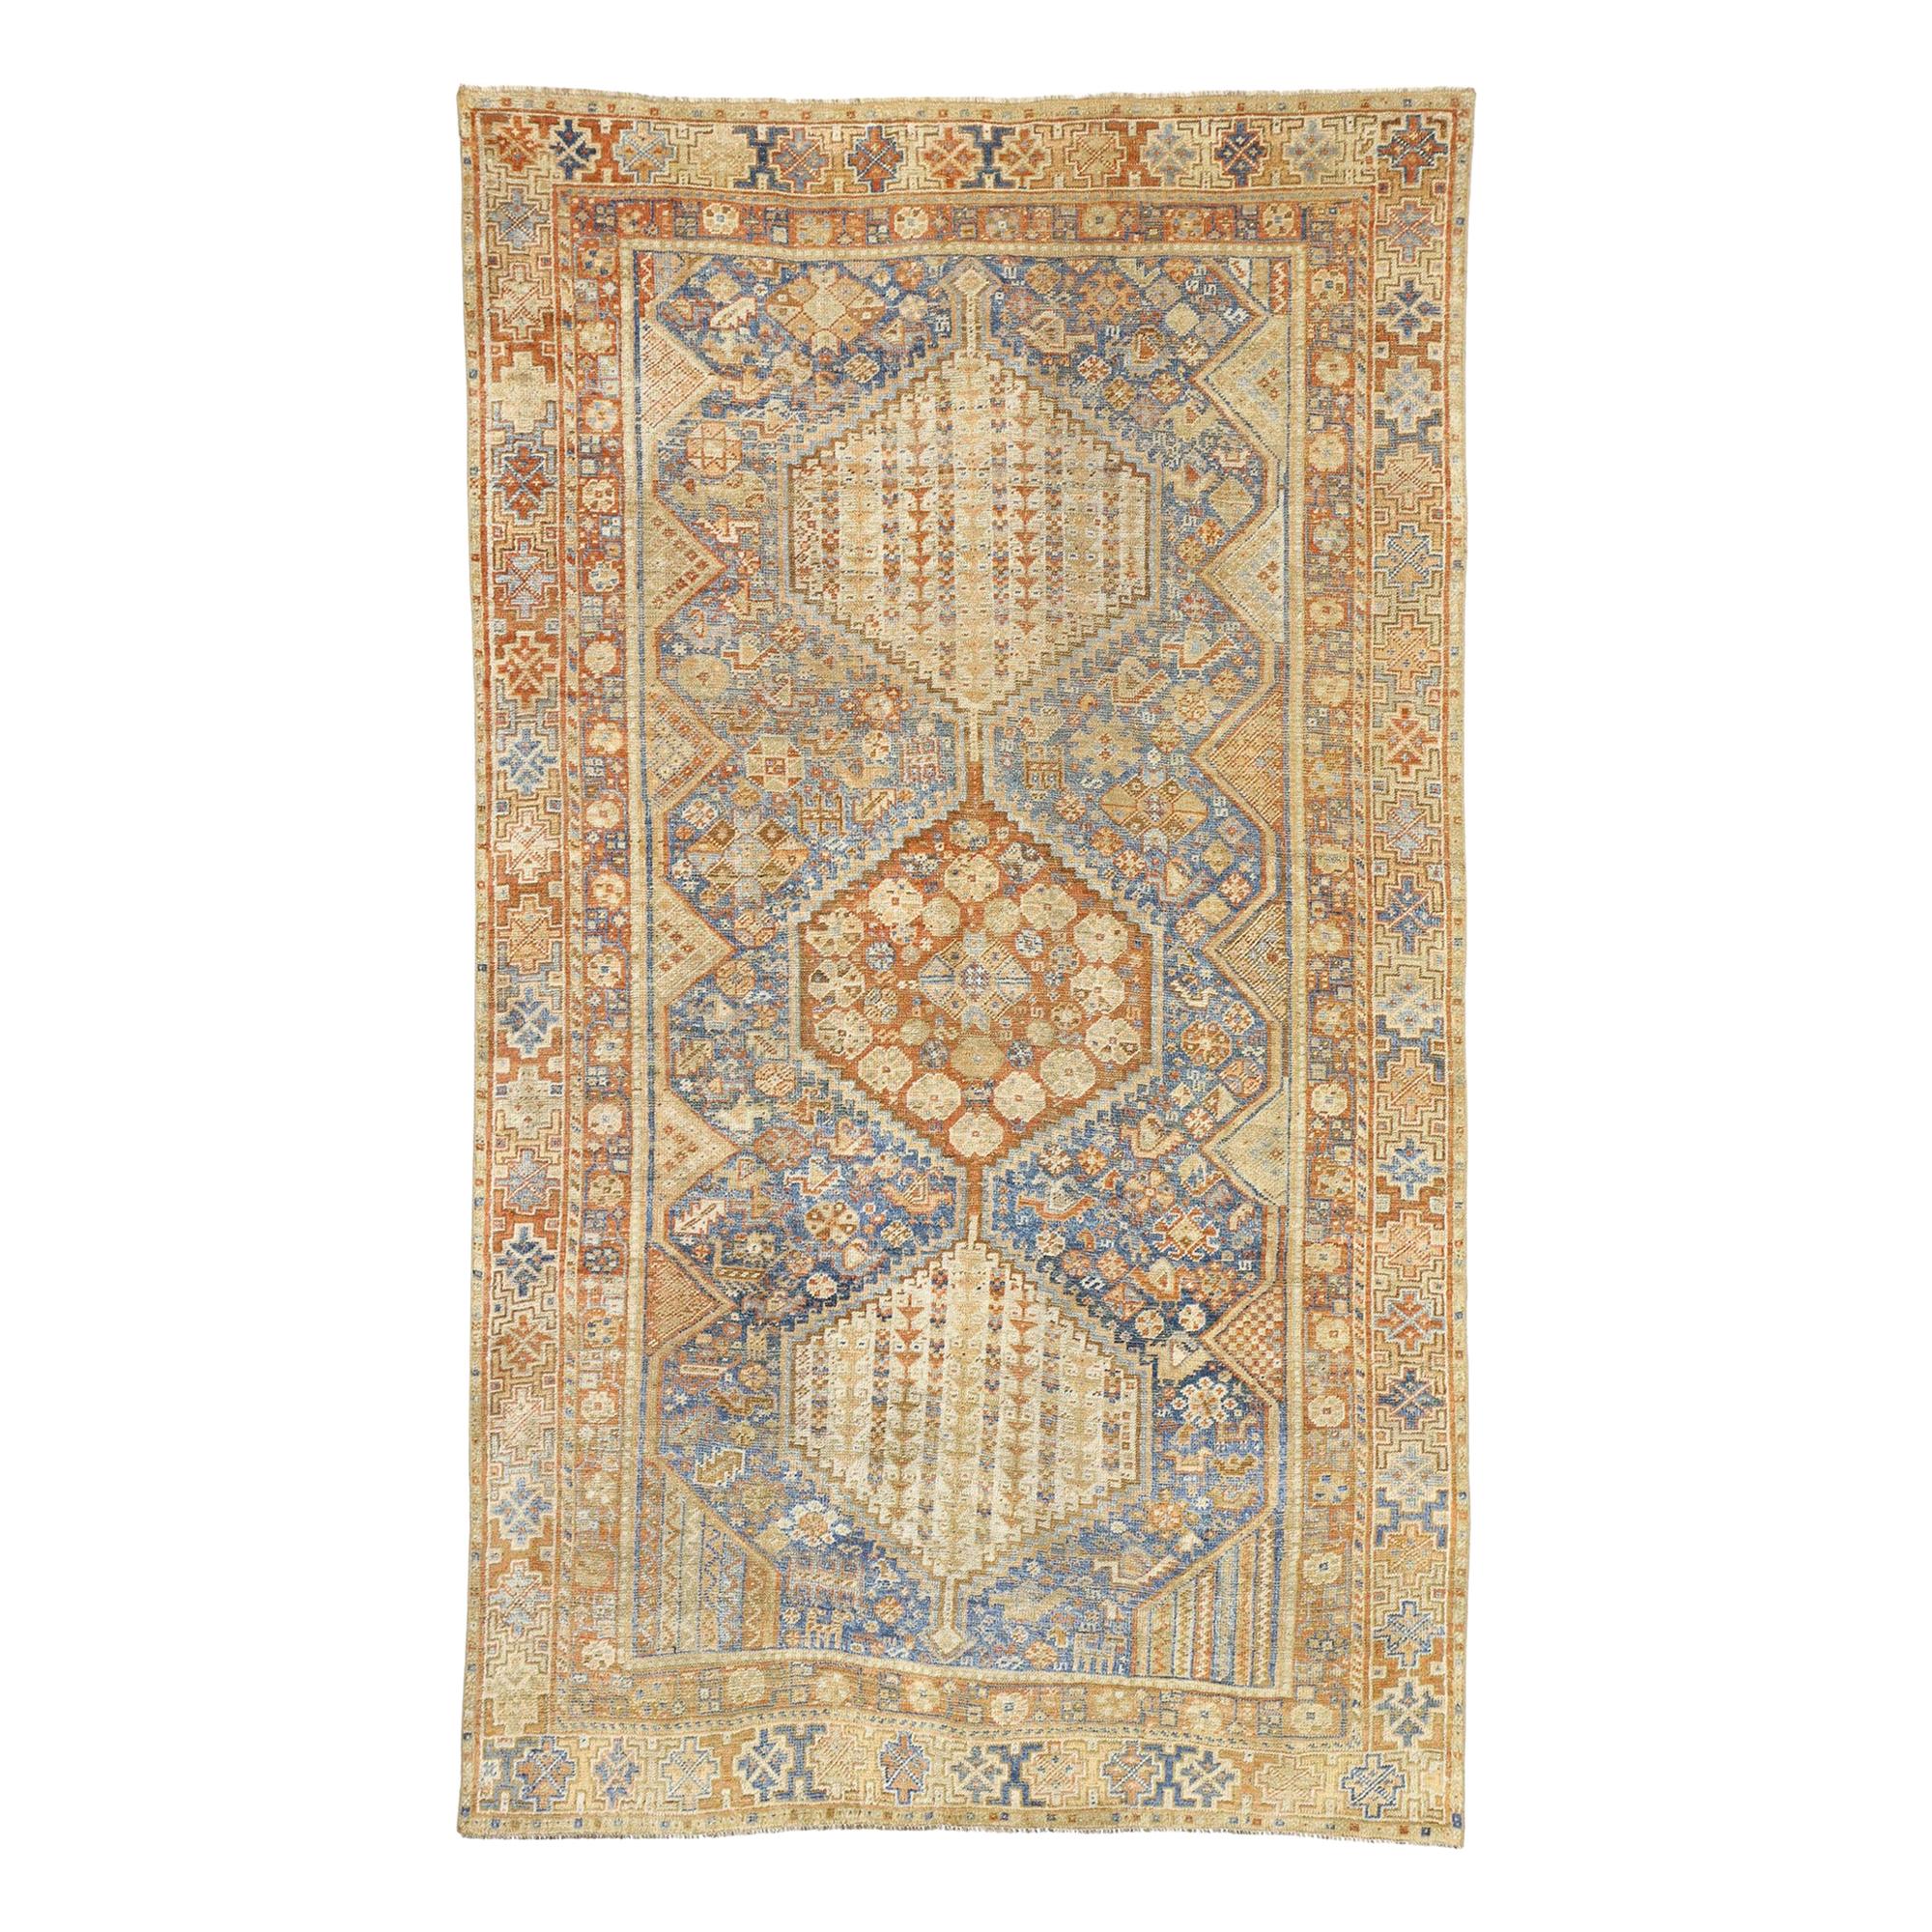 Distressed Antique Persian Shiraz Design Rug with Italian Cottage Rustic Style For Sale